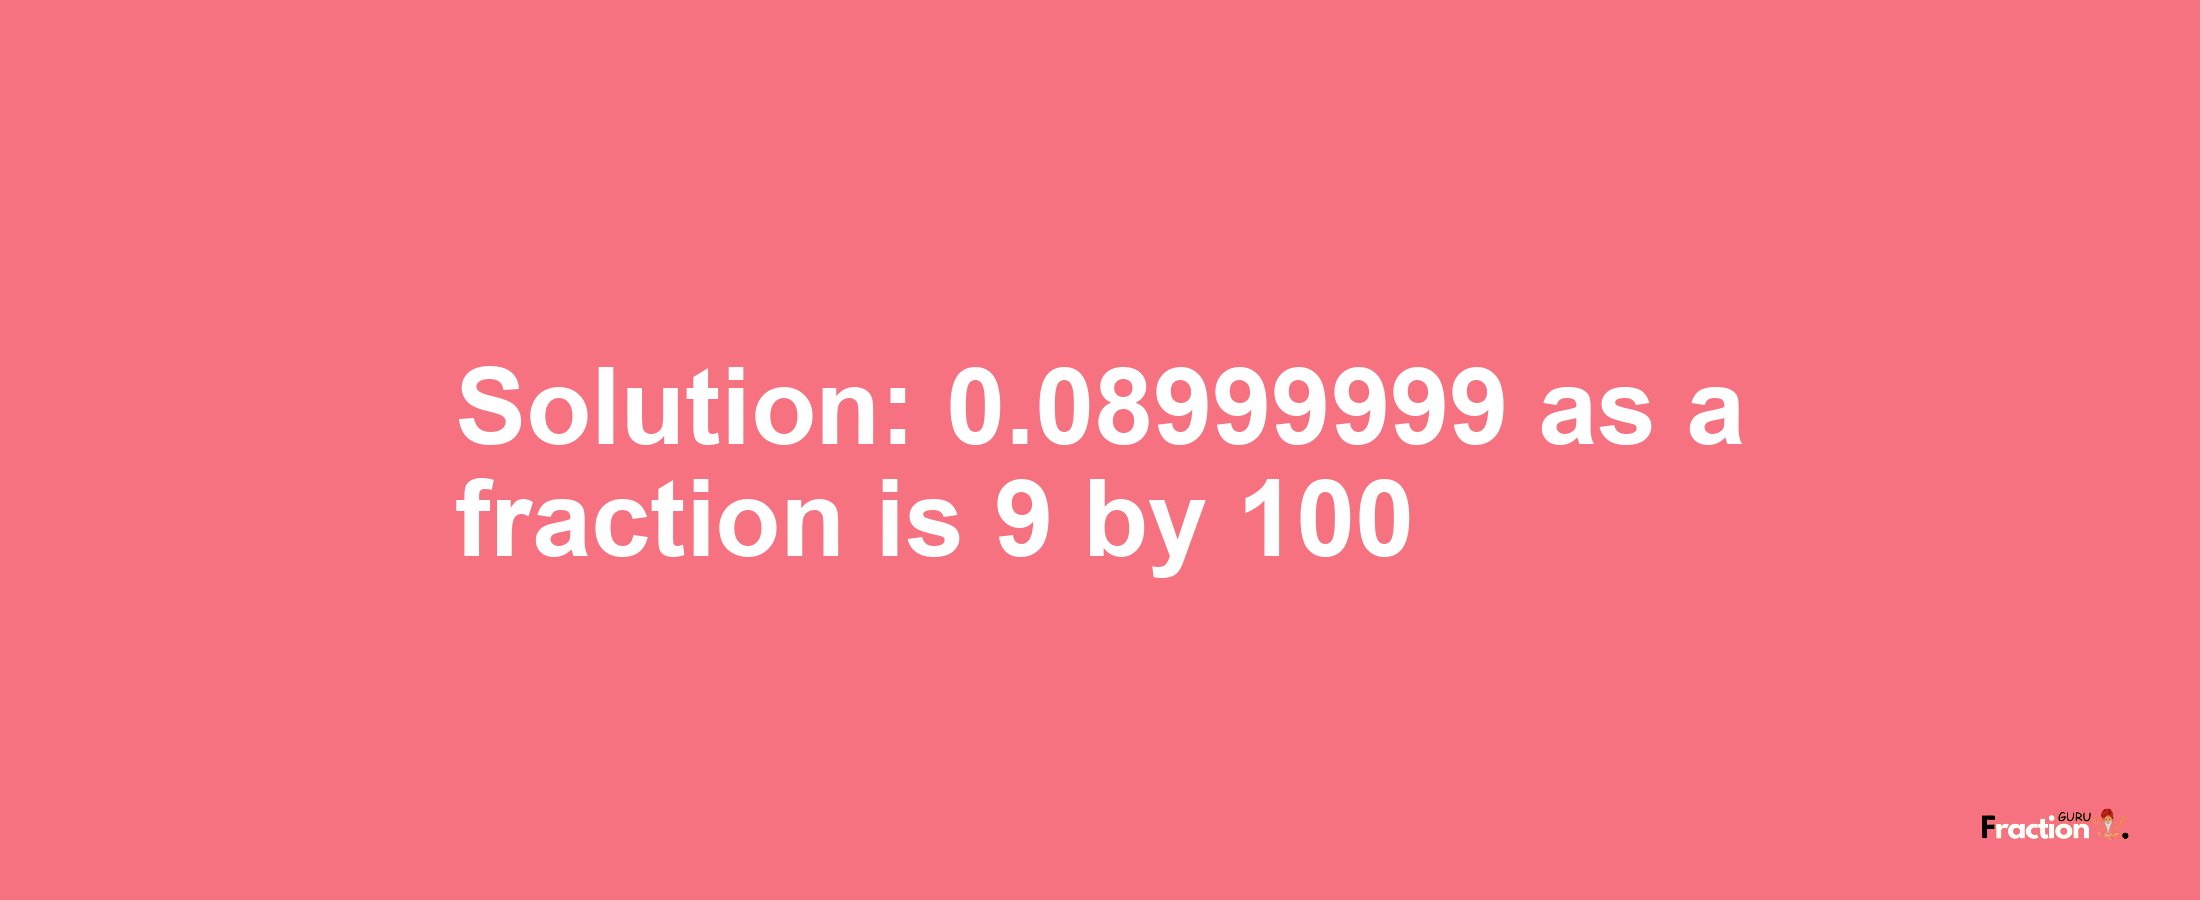 Solution:0.08999999 as a fraction is 9/100